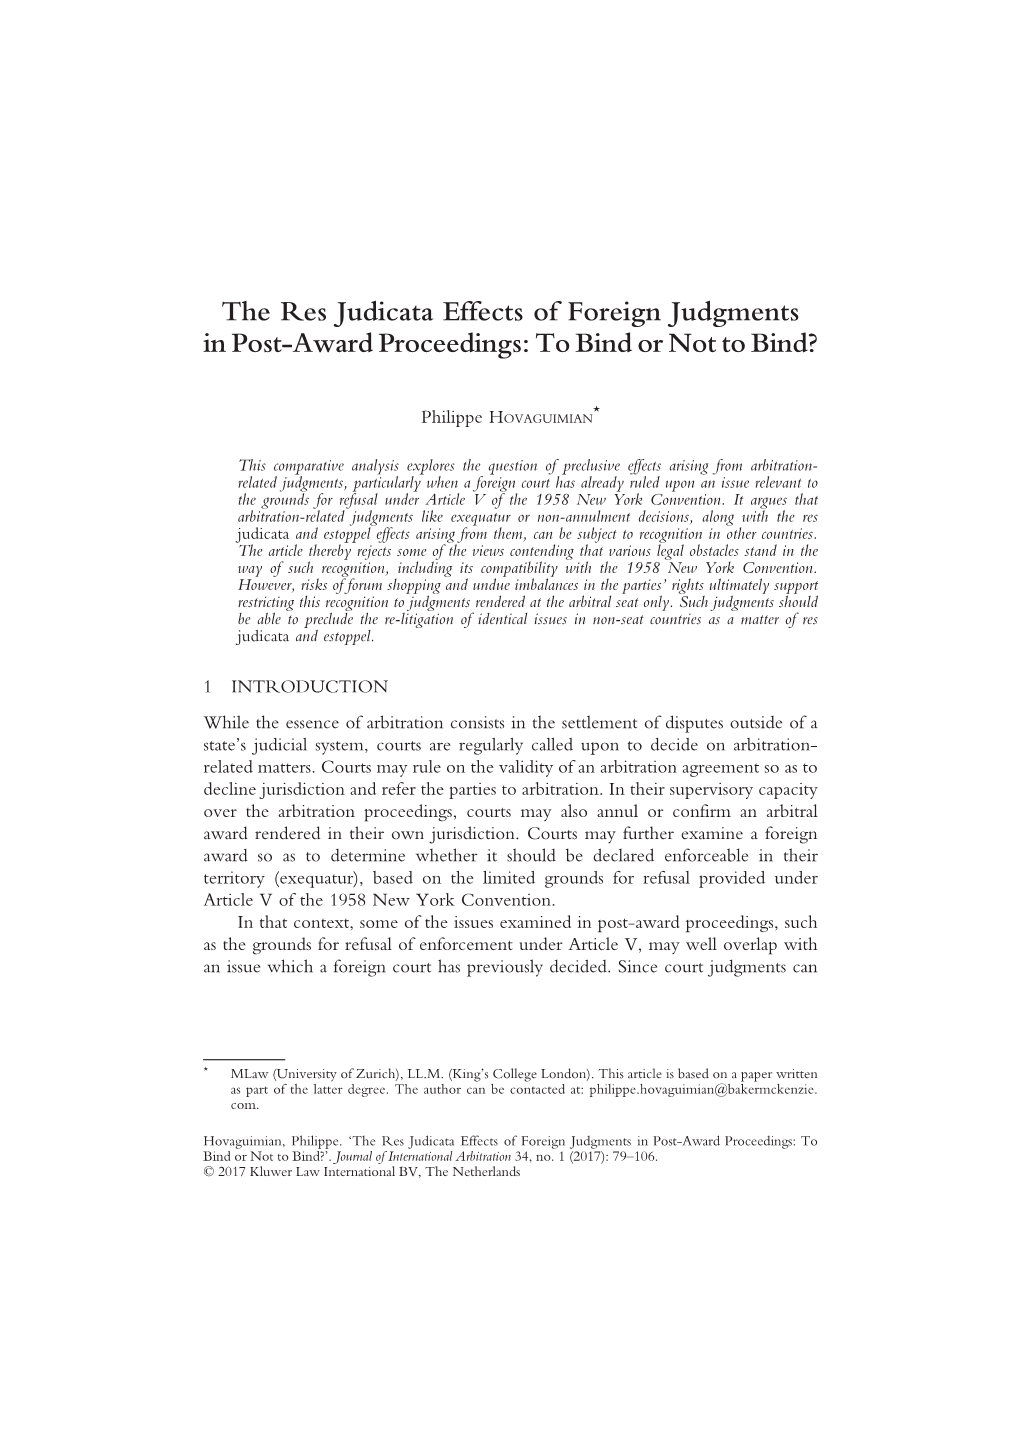 The Res Judicata Effects of Foreign Judgments in Post-Award Proceedings: to Bind Or Not to Bind?